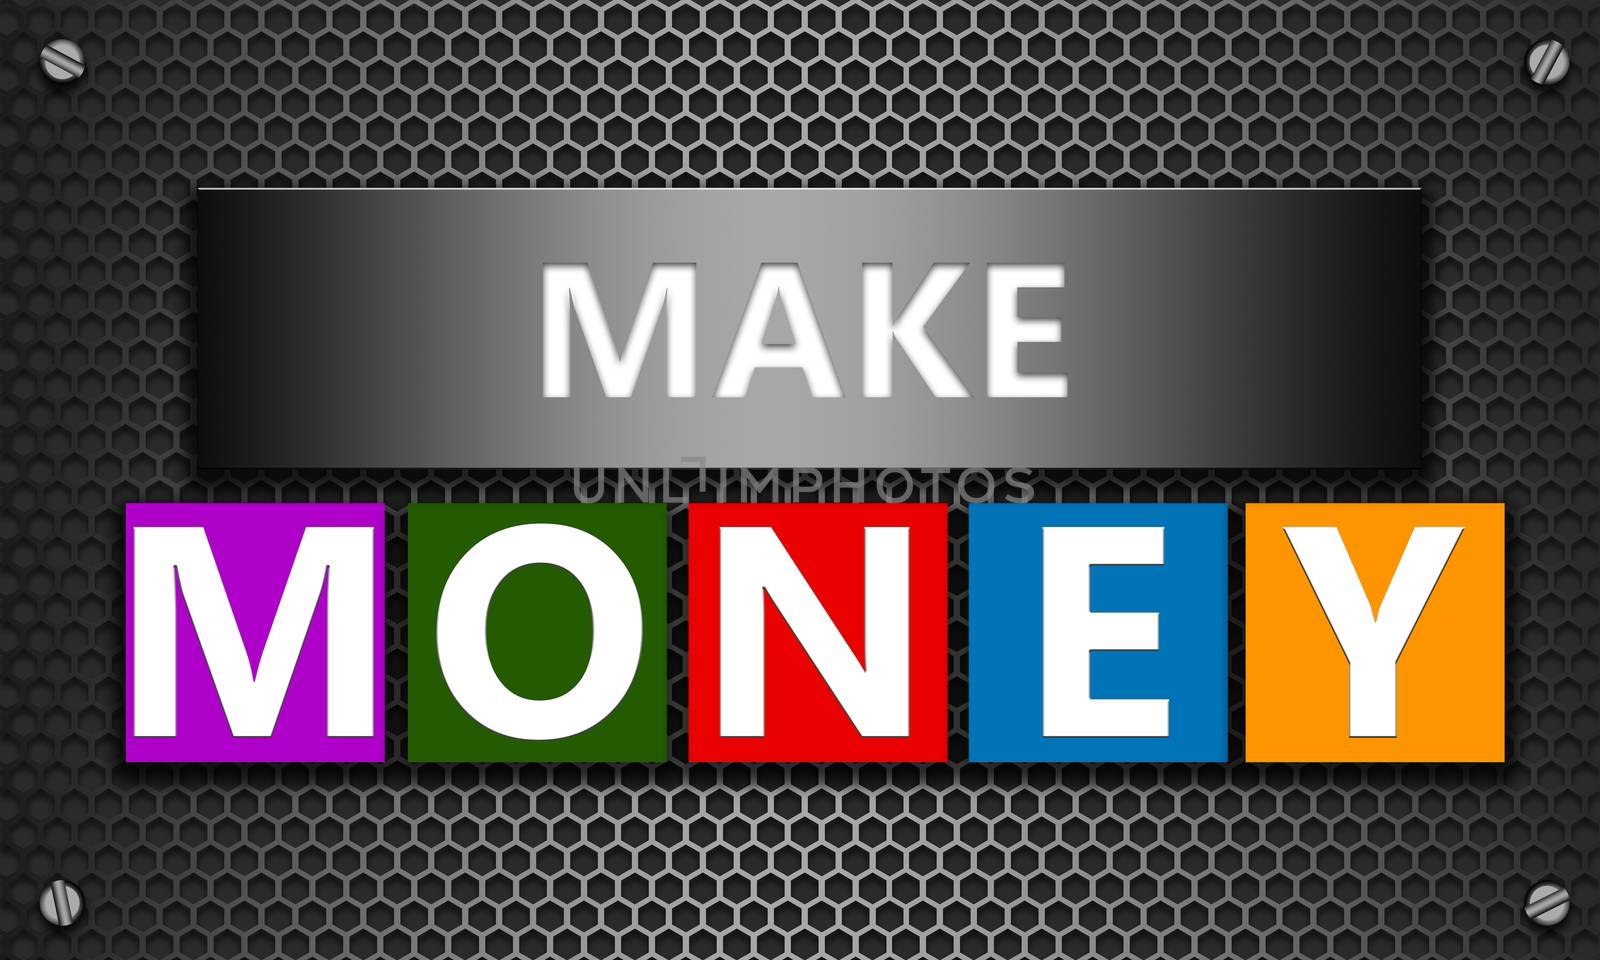 Make money concept on mesh hexagon background by tang90246